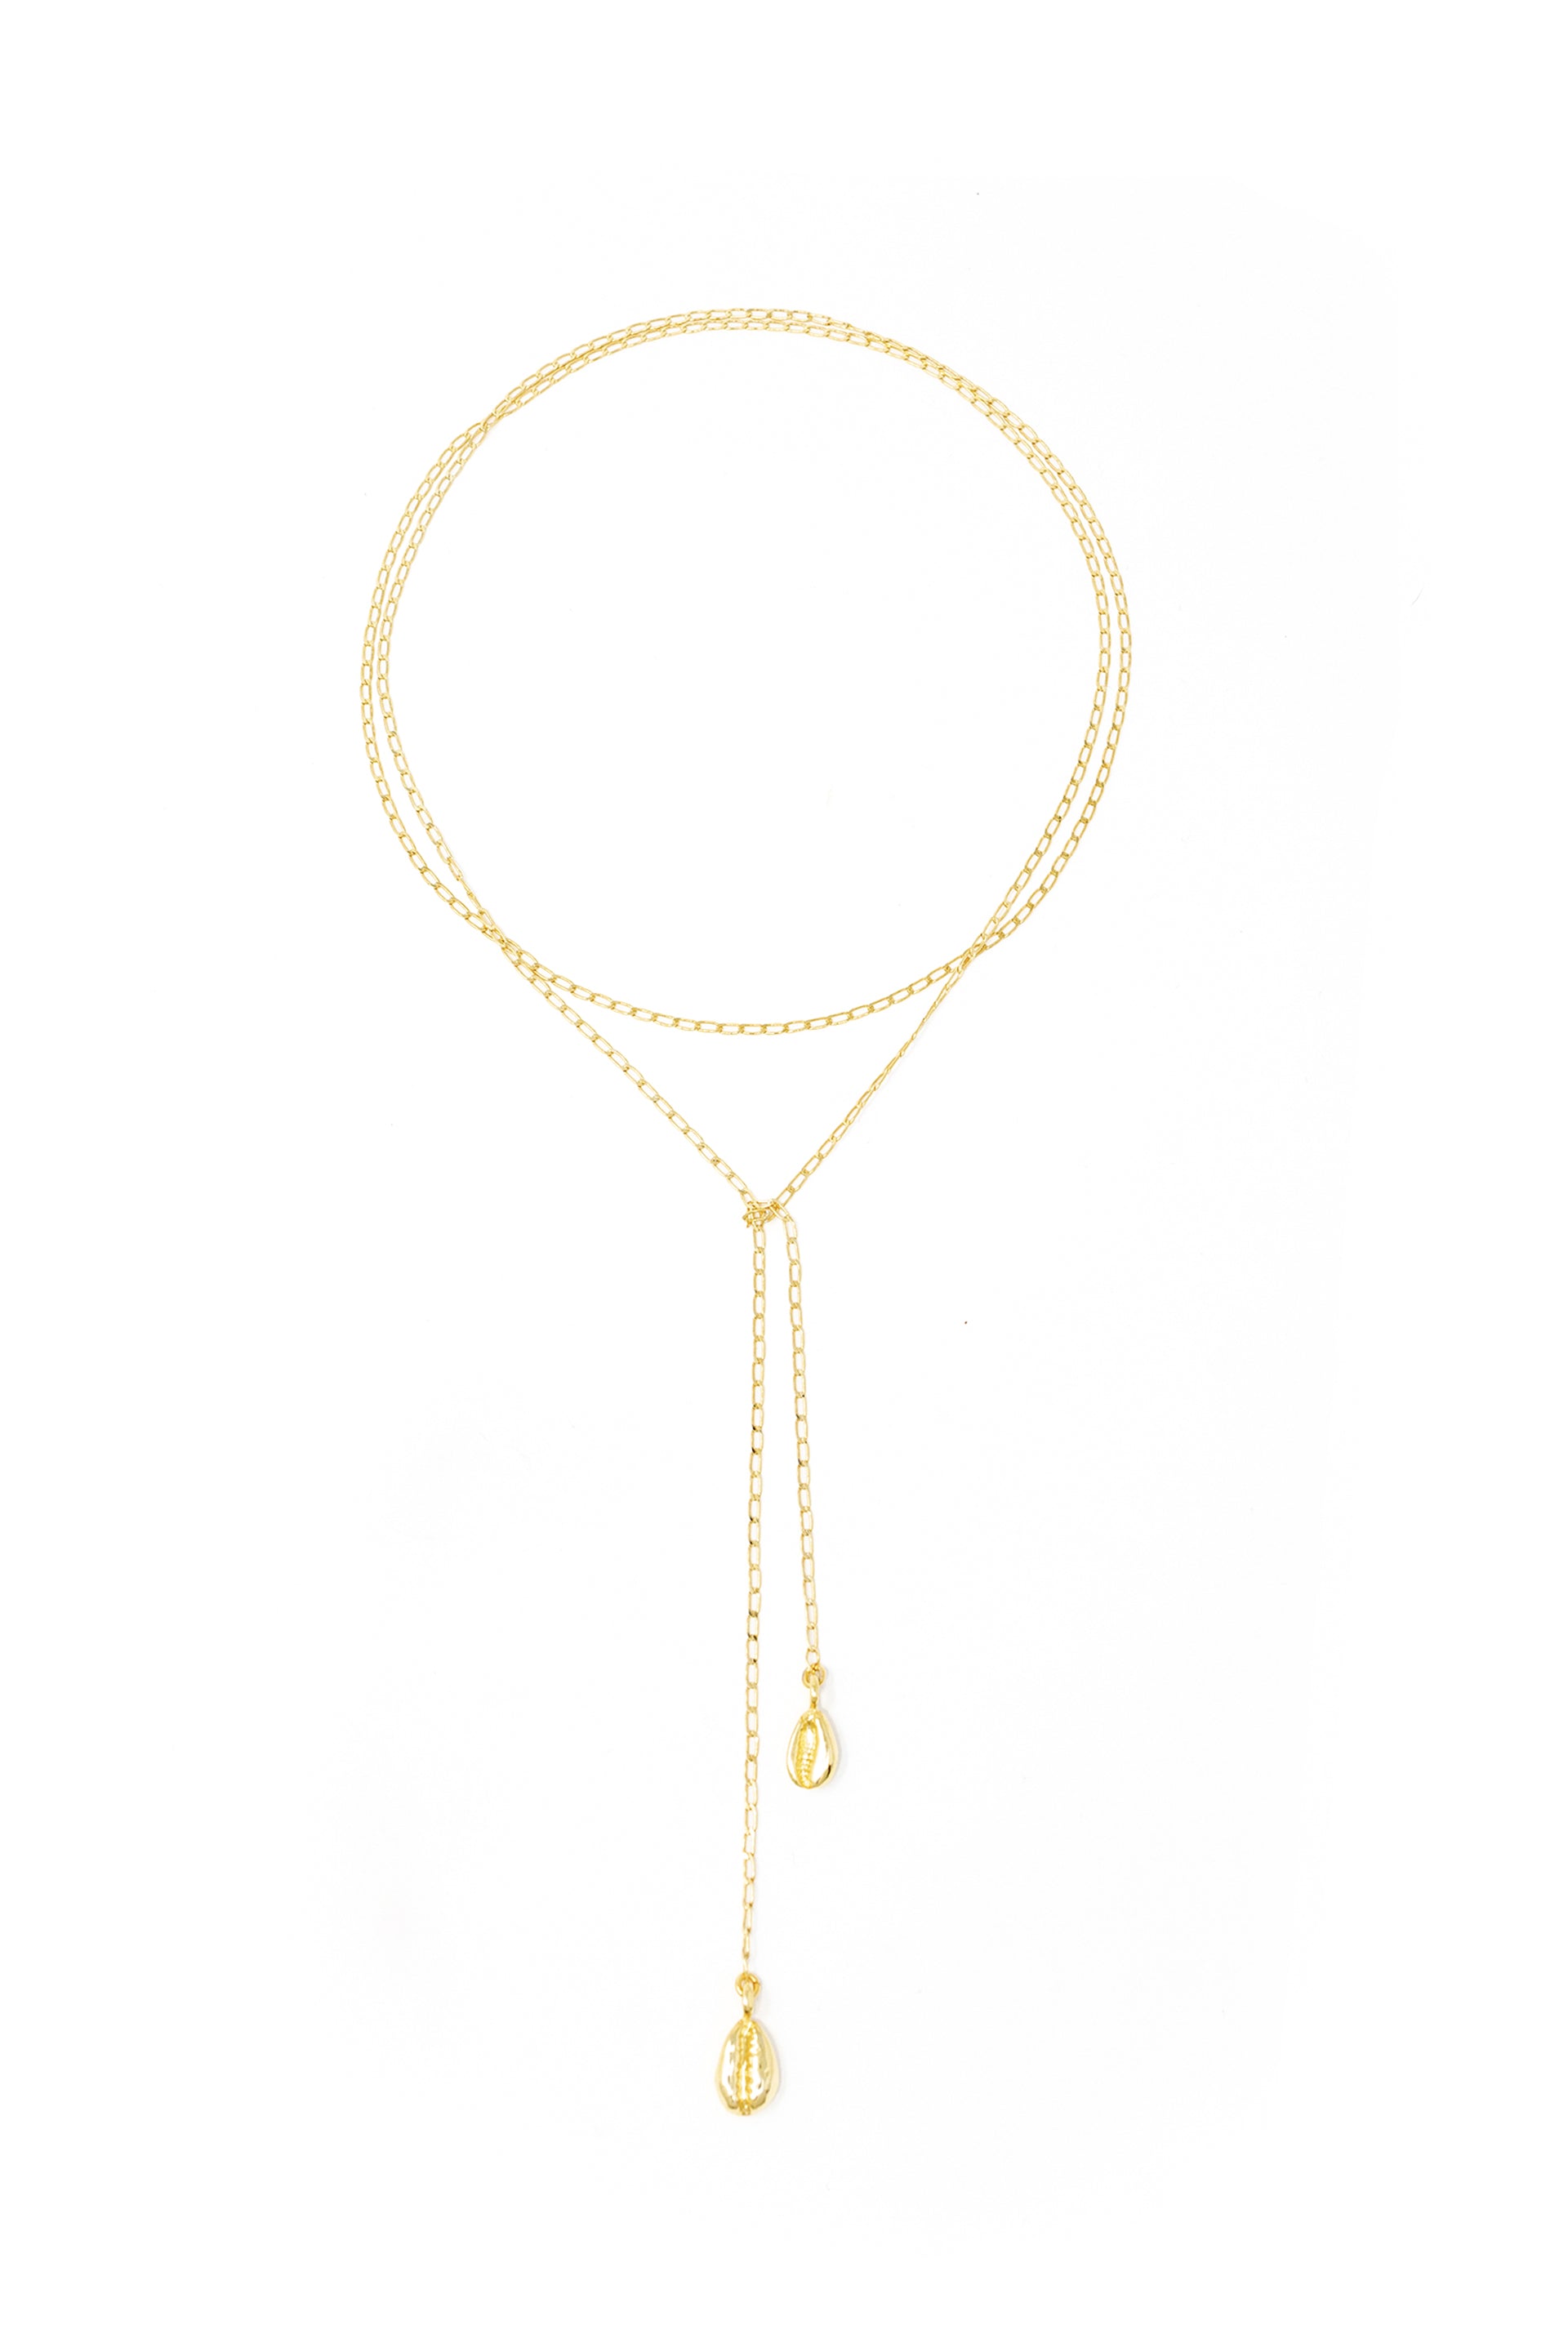 THE COWRIE Infinity Necklace